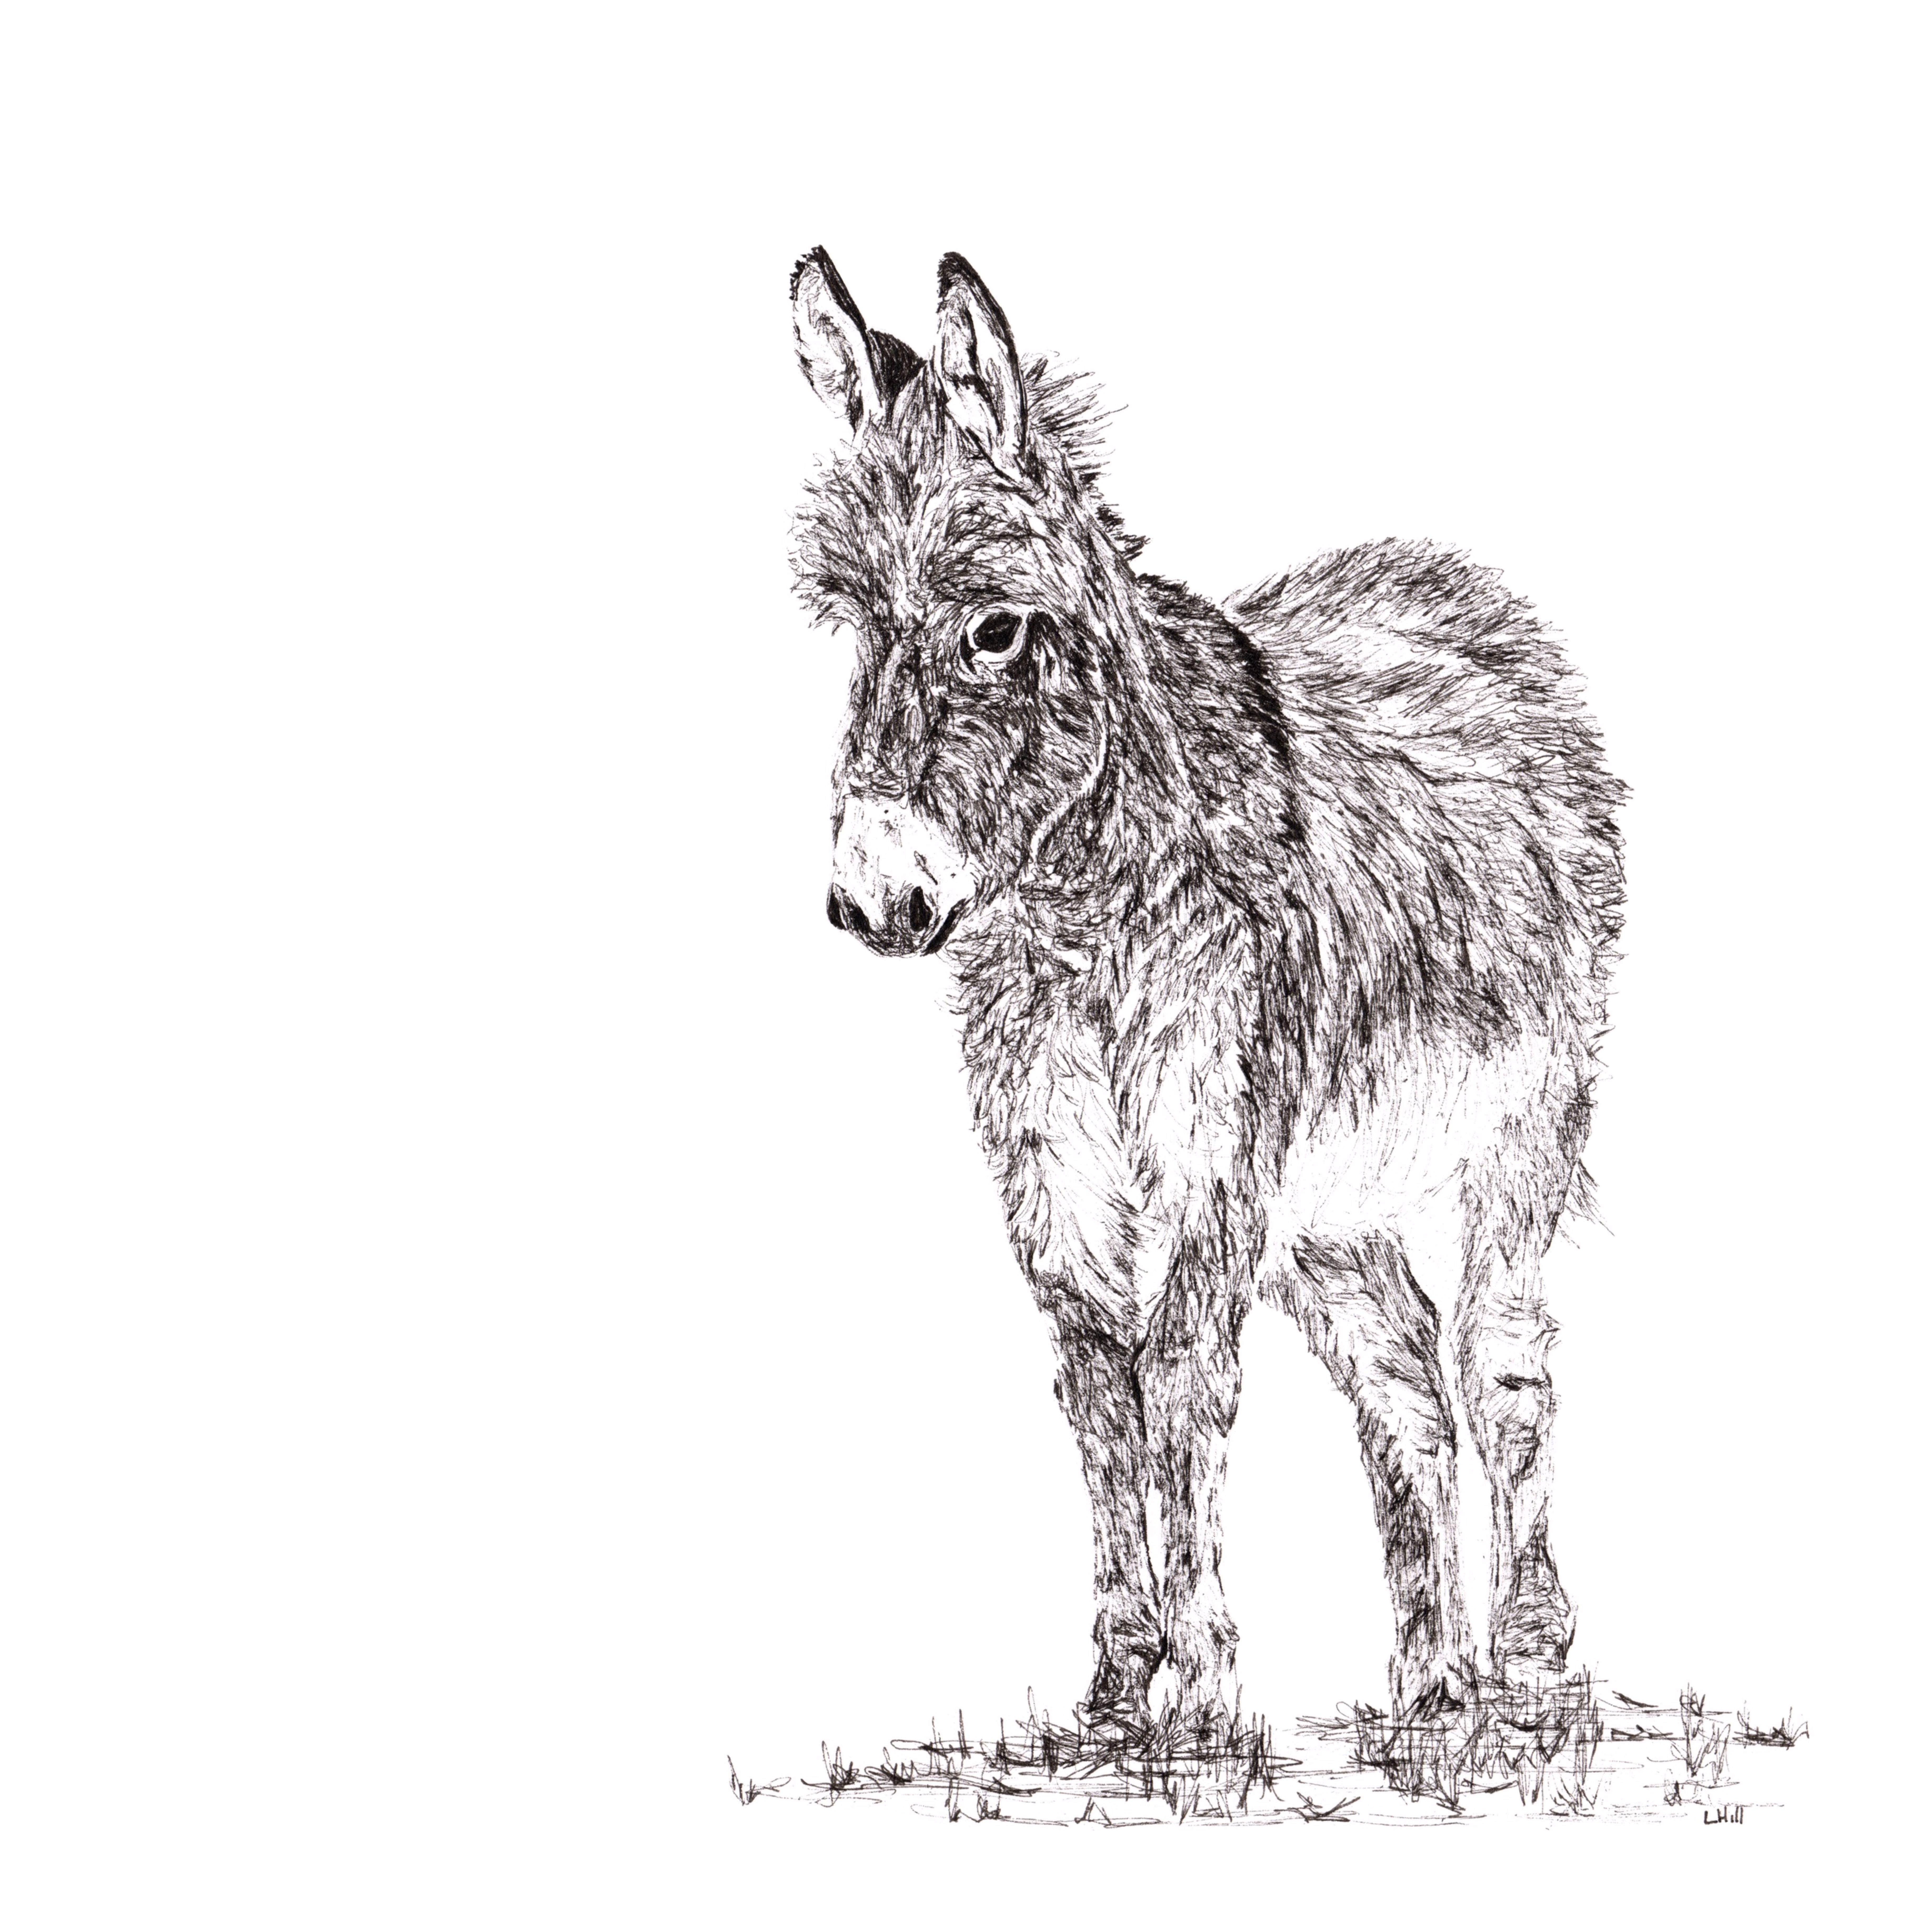 Donkey pen and ink illustration by Louisa Hill